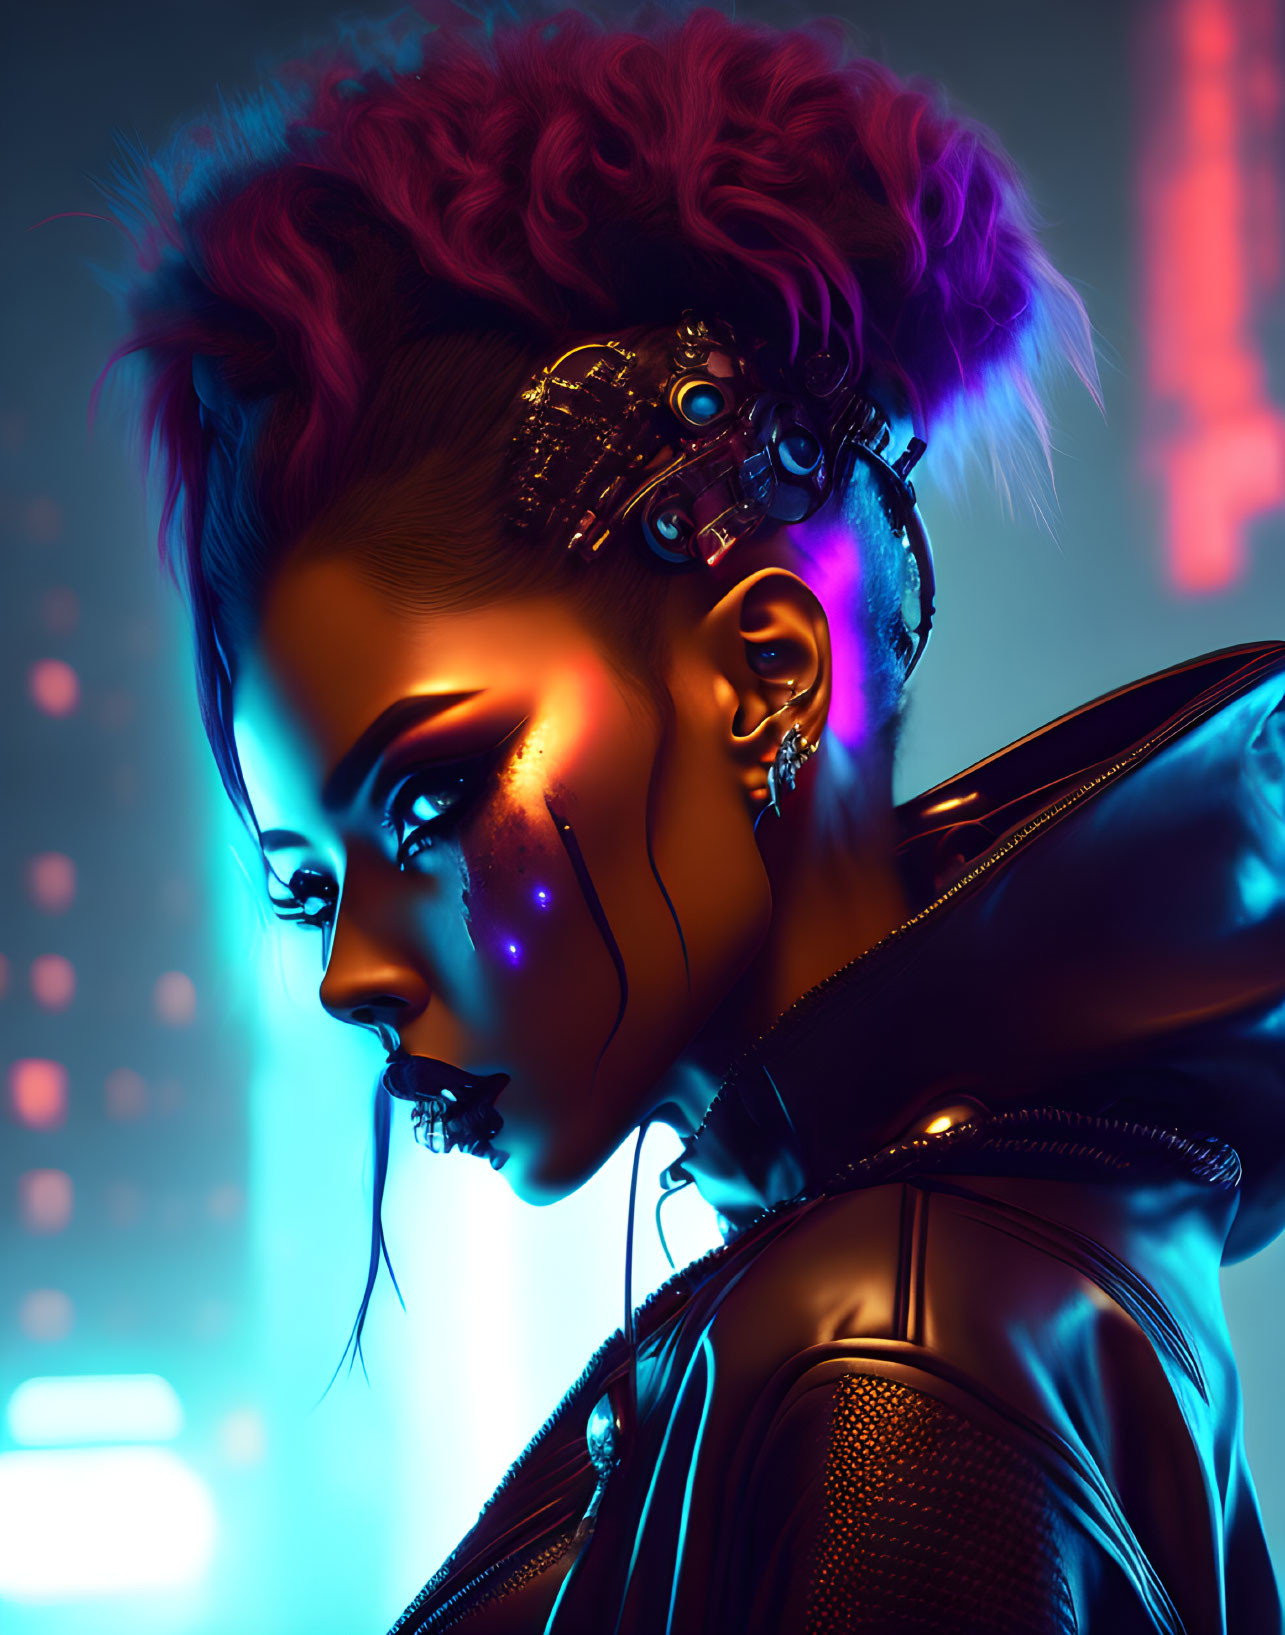 Futuristic woman with cybernetic implants and neon makeup in vibrant cityscape